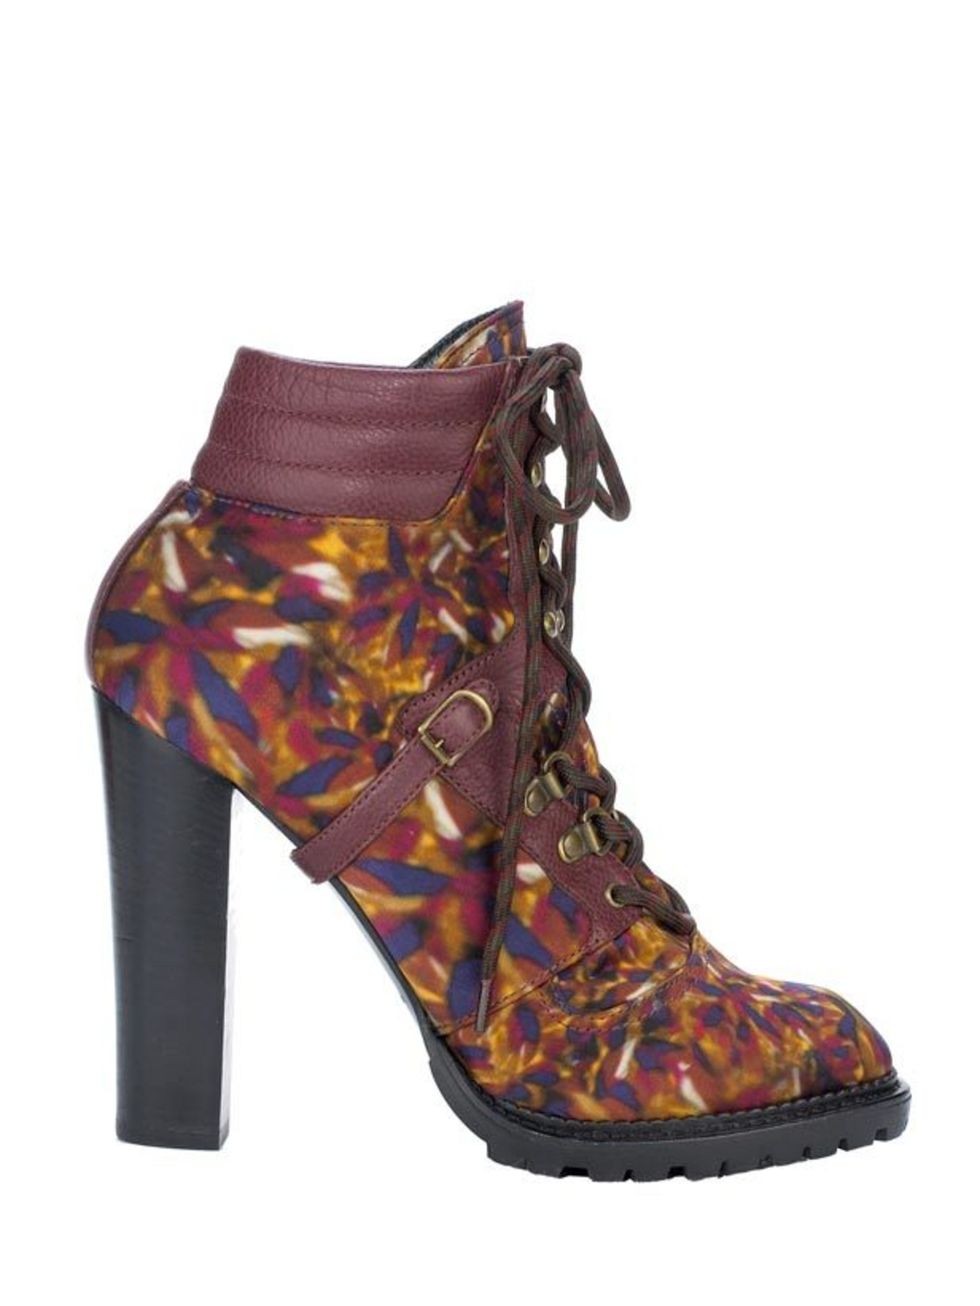 <p><strong>Emma Sells, ELLEuk.com Fashion and News Editor:</strong> 'I've been lusting after these boots ever since I saw them hit the catwalk back in February. They're the perfect colourful counterpoint to all the camel I've been stocking up on and my au